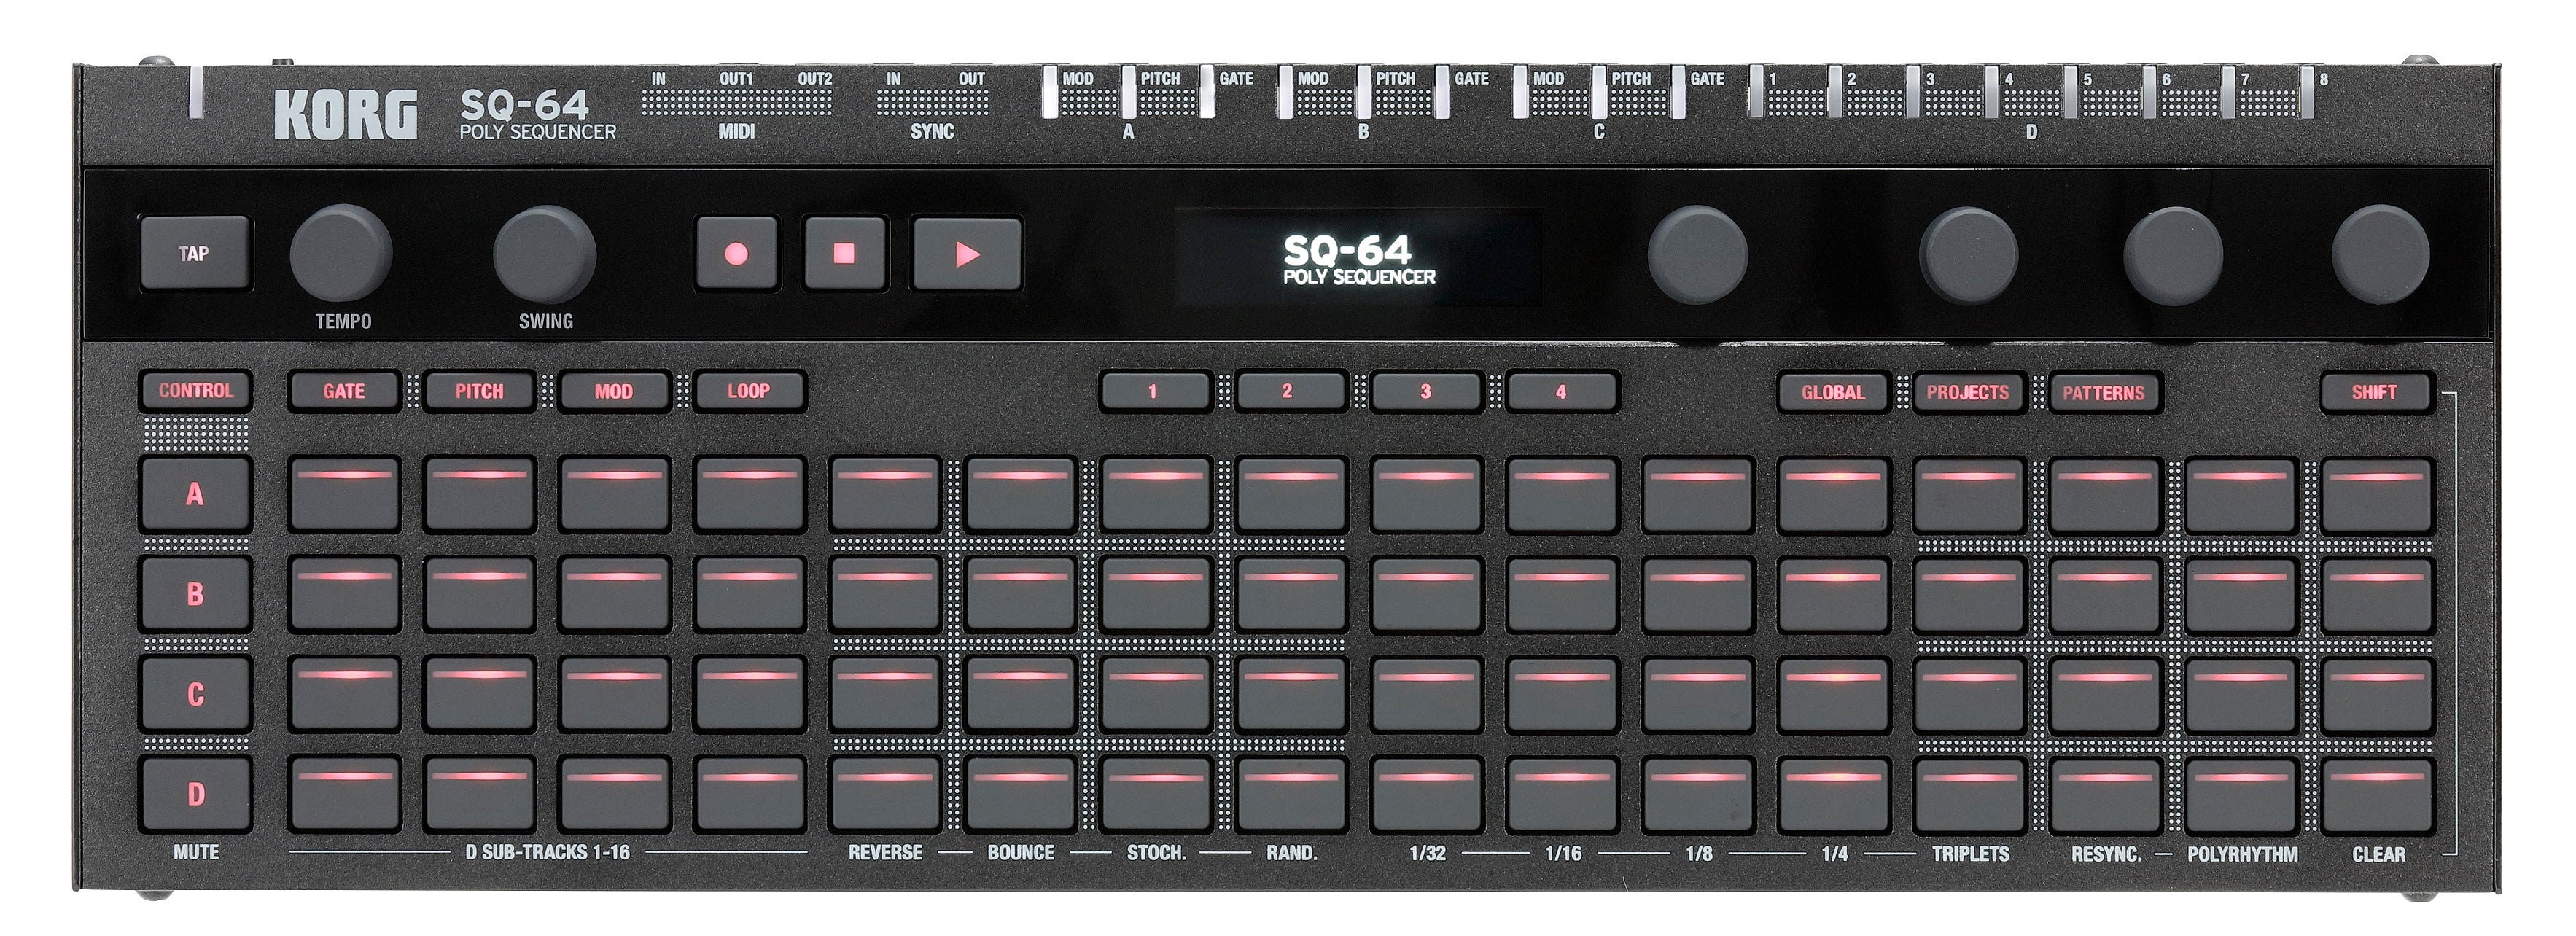 Korg sq-64 Compact Polyphonic Step Sequencer